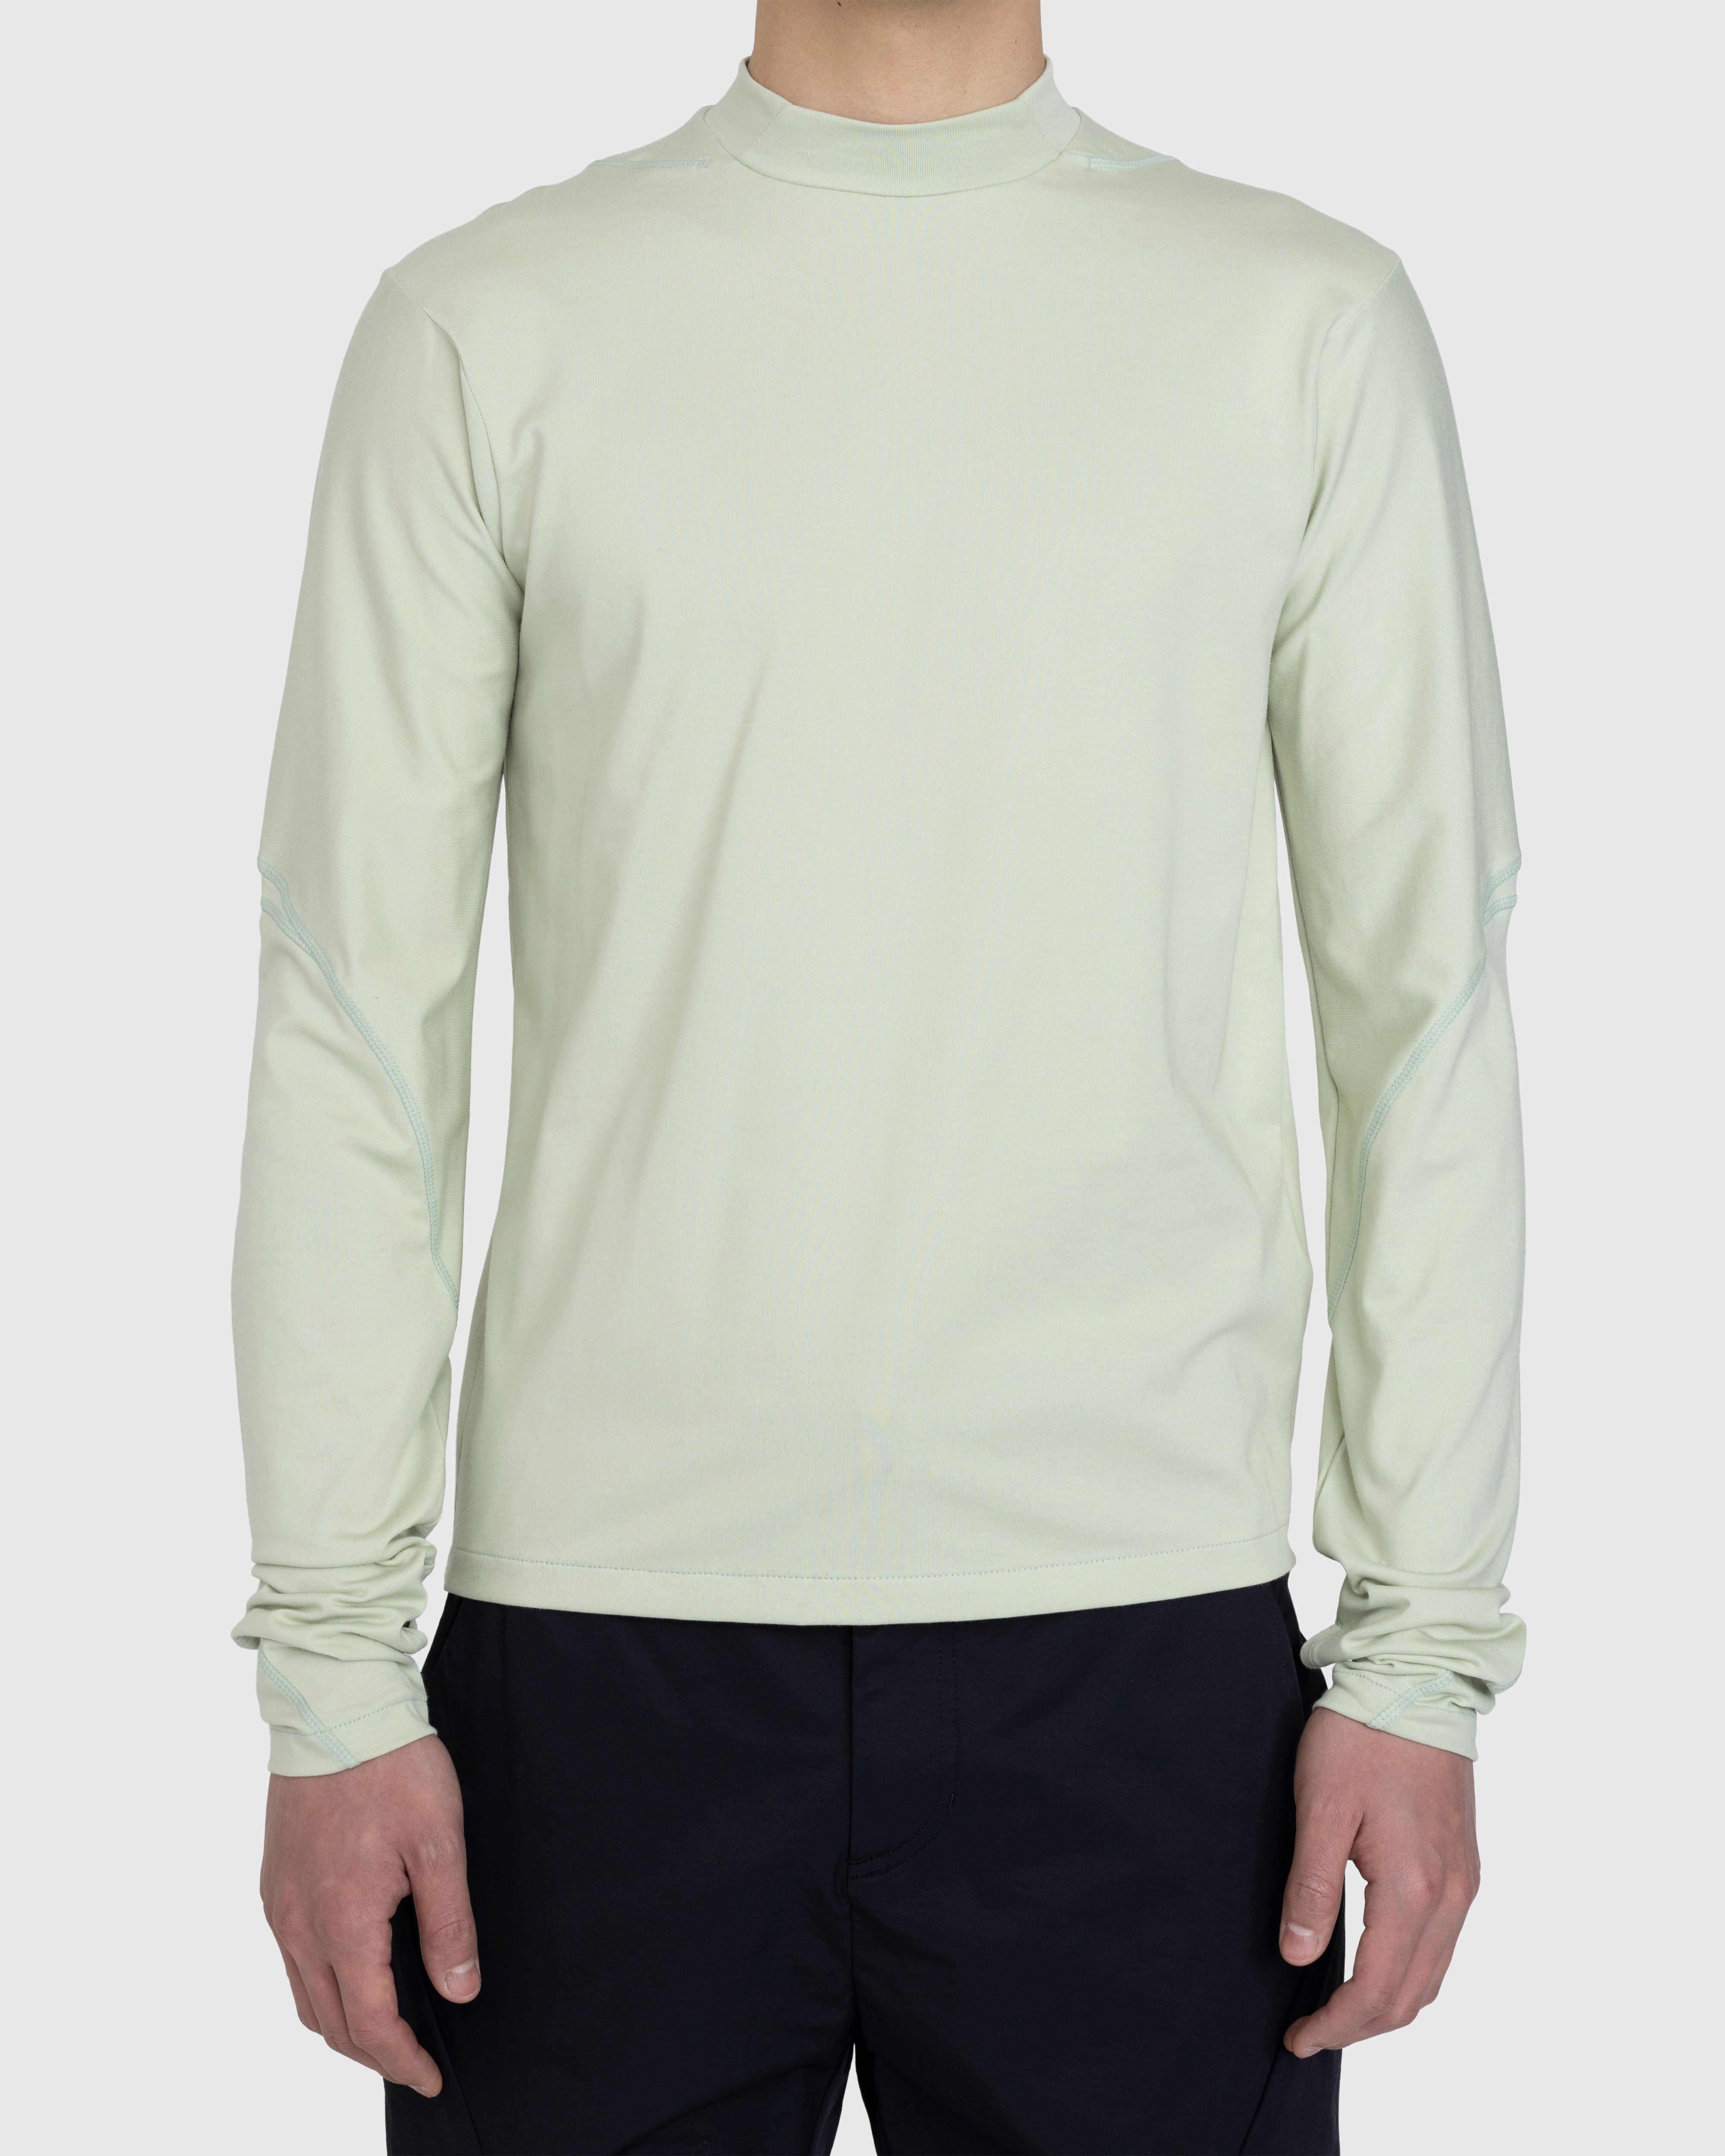 Post Archive Faction (PAF) - 5.0 Longsleeve Right Shirt Lime - Clothing - Green - Image 2